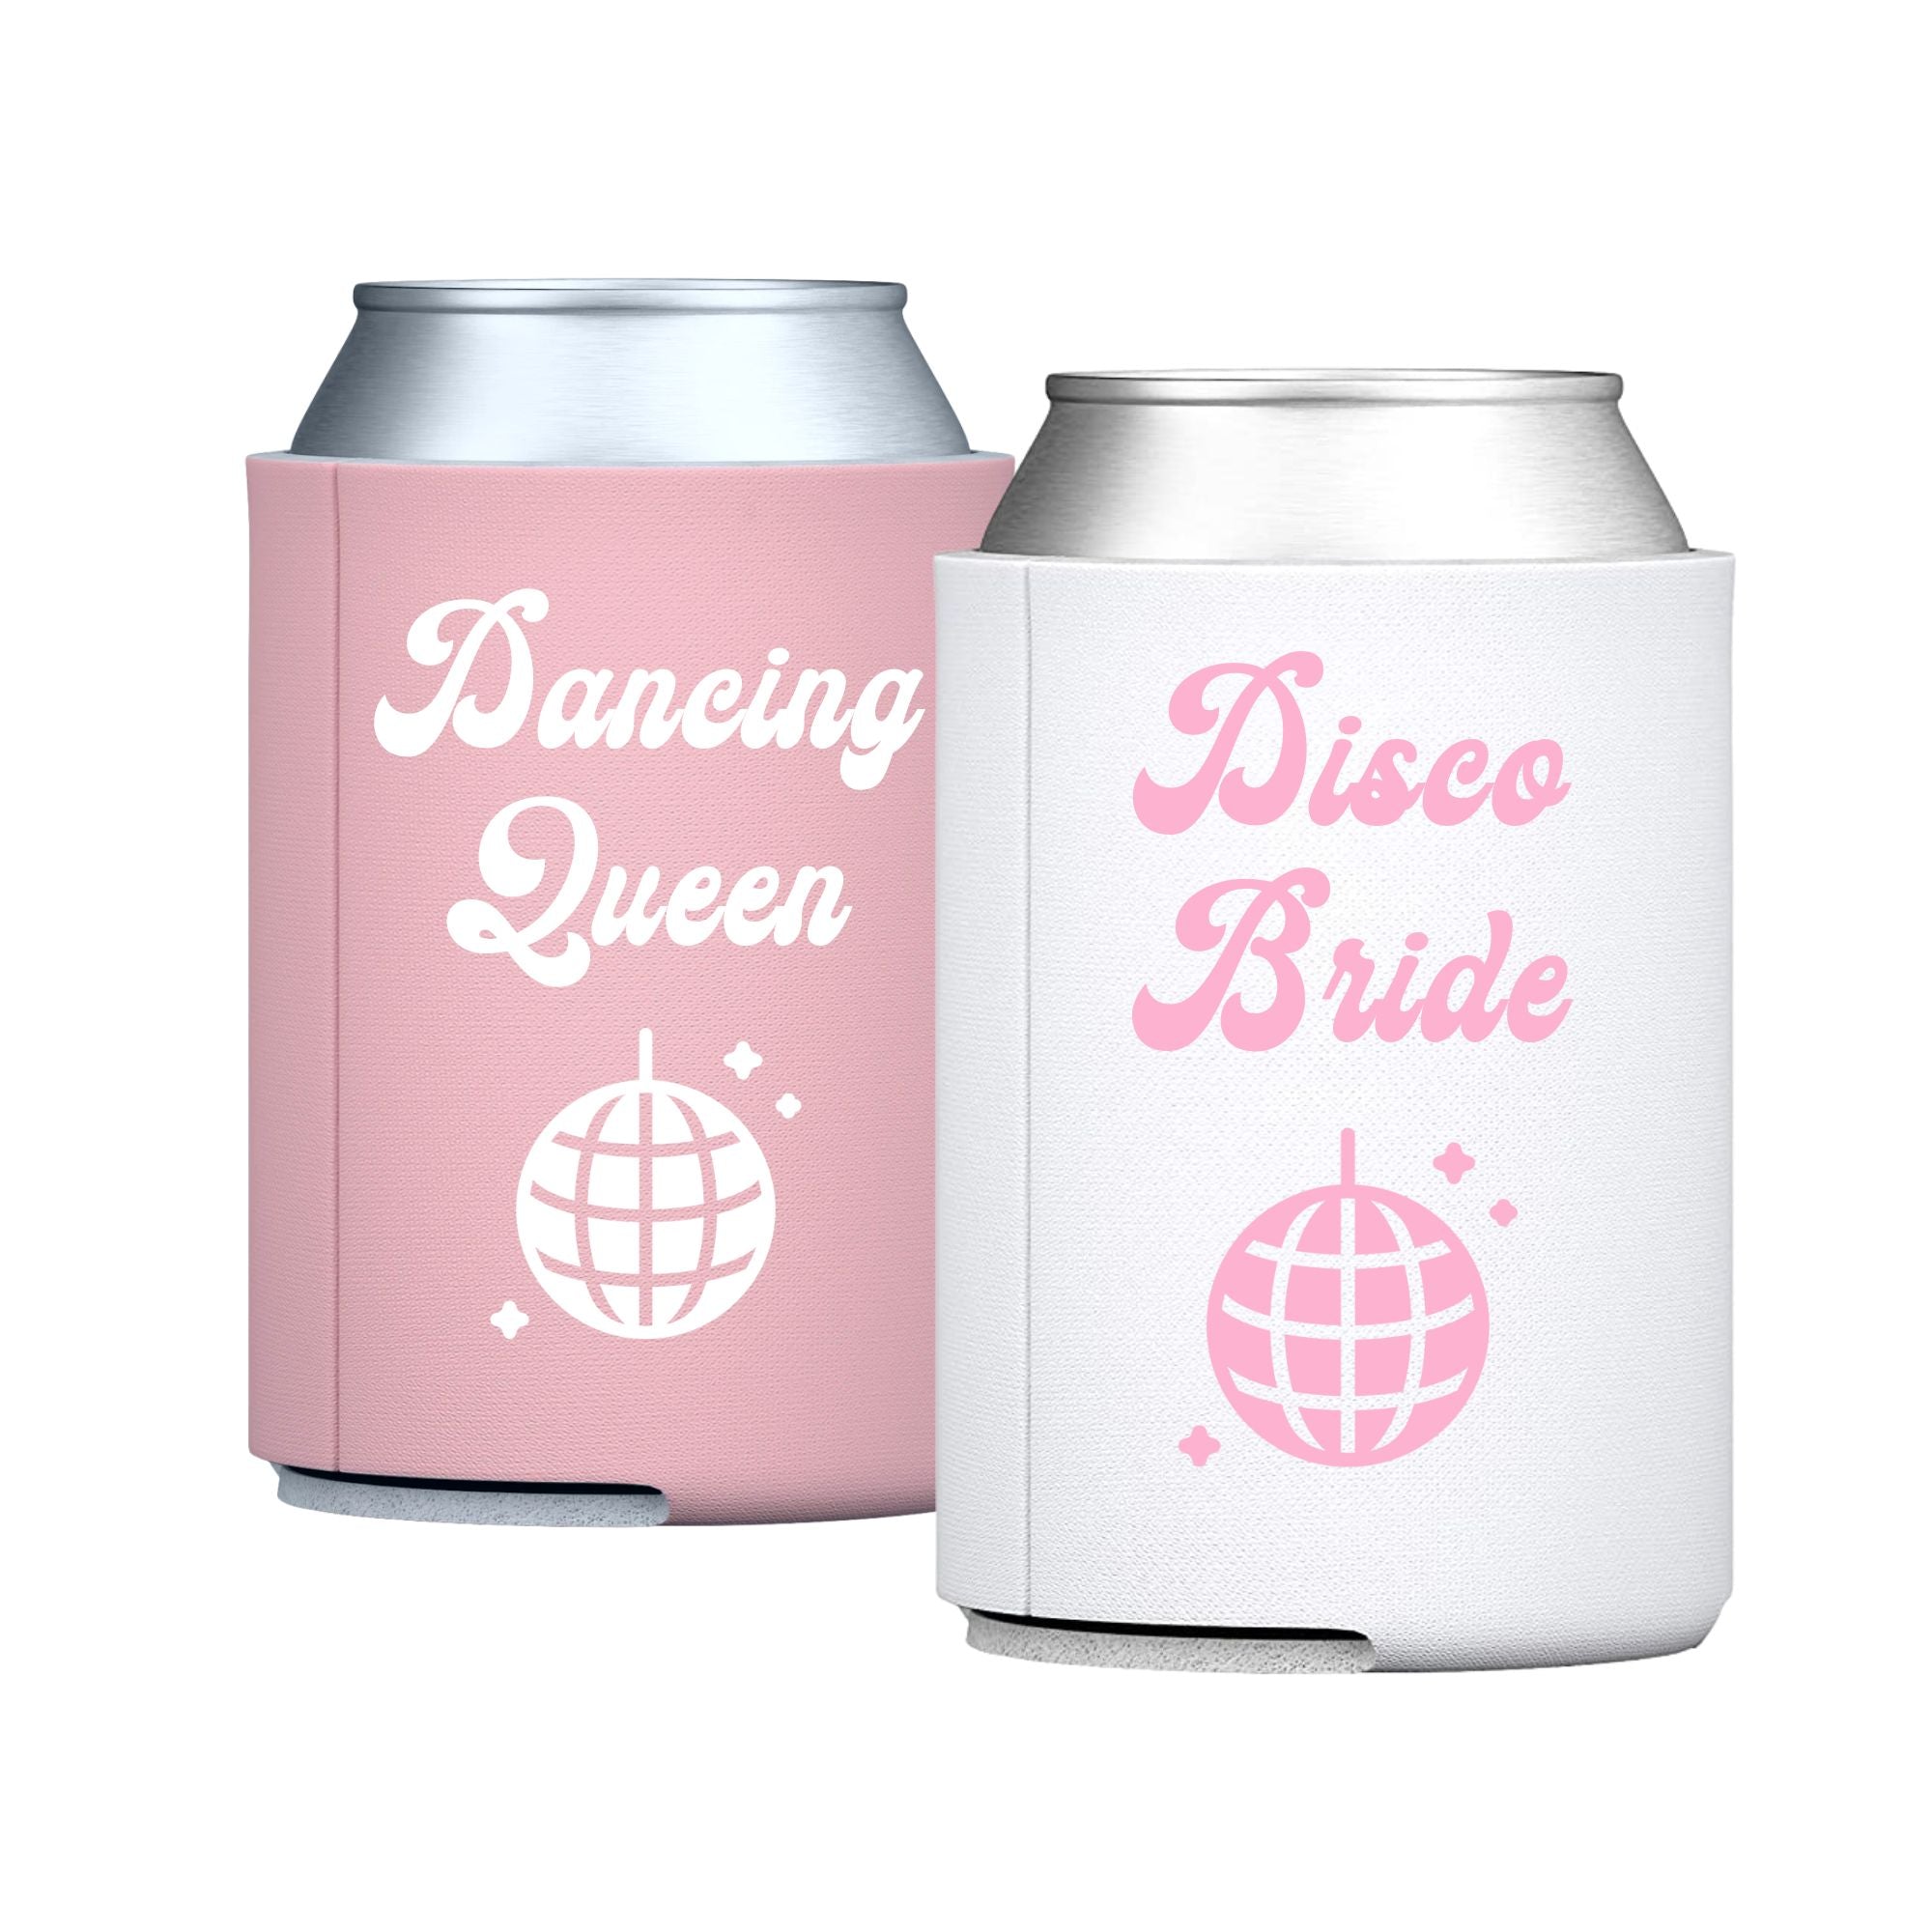 Disco Bride / Dancing Queen Can Cooler - Sprinkled With Pink #bachelorette #custom #gifts